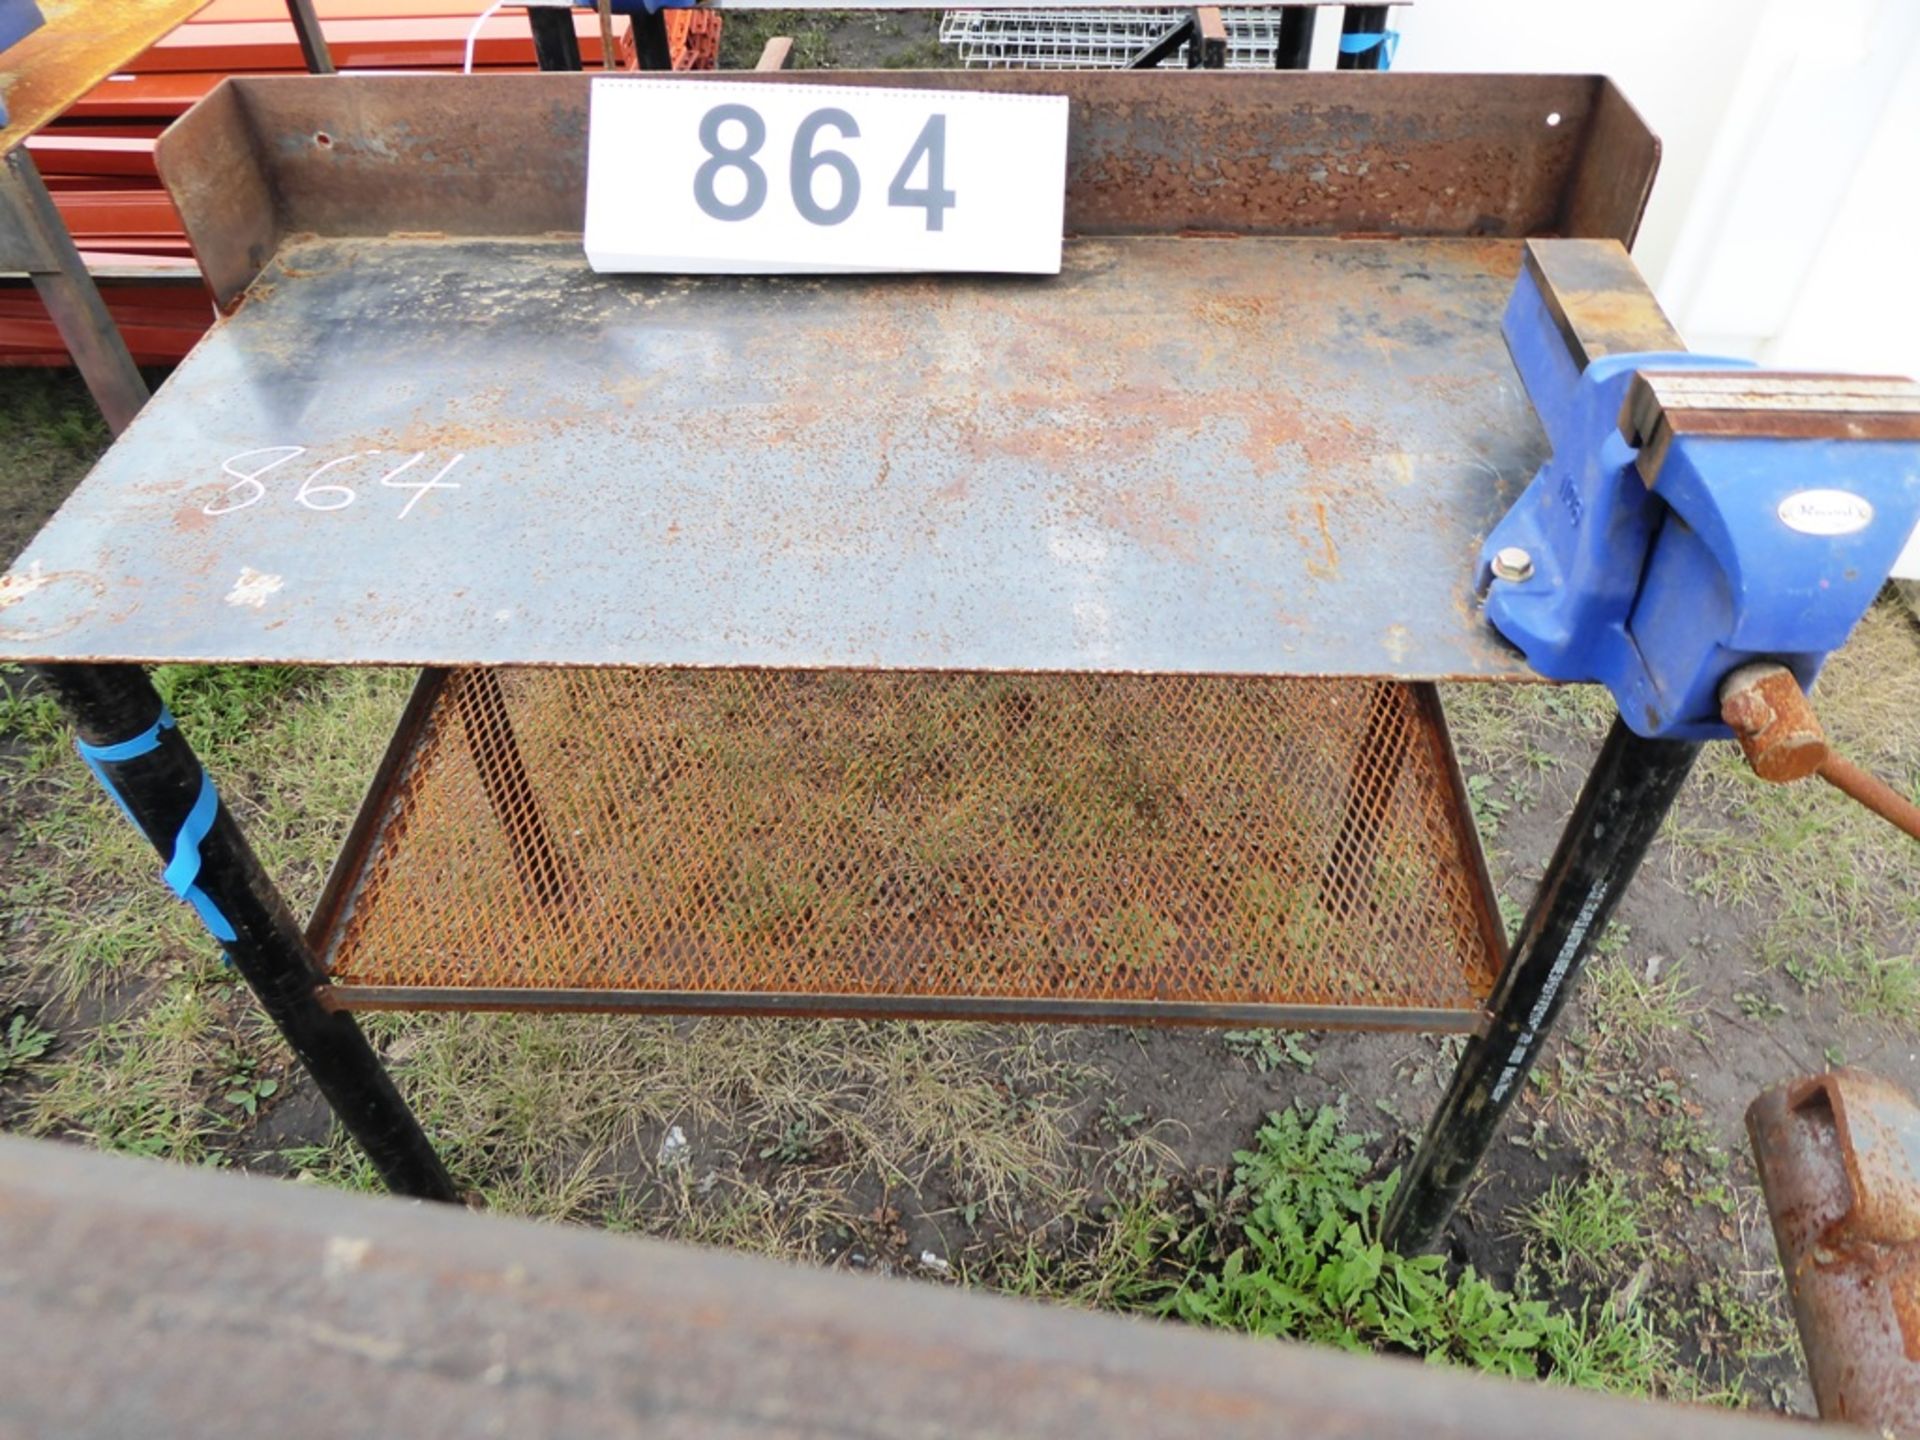 24"X48" STEEL WORK BENCH W/ VISE - Image 2 of 2